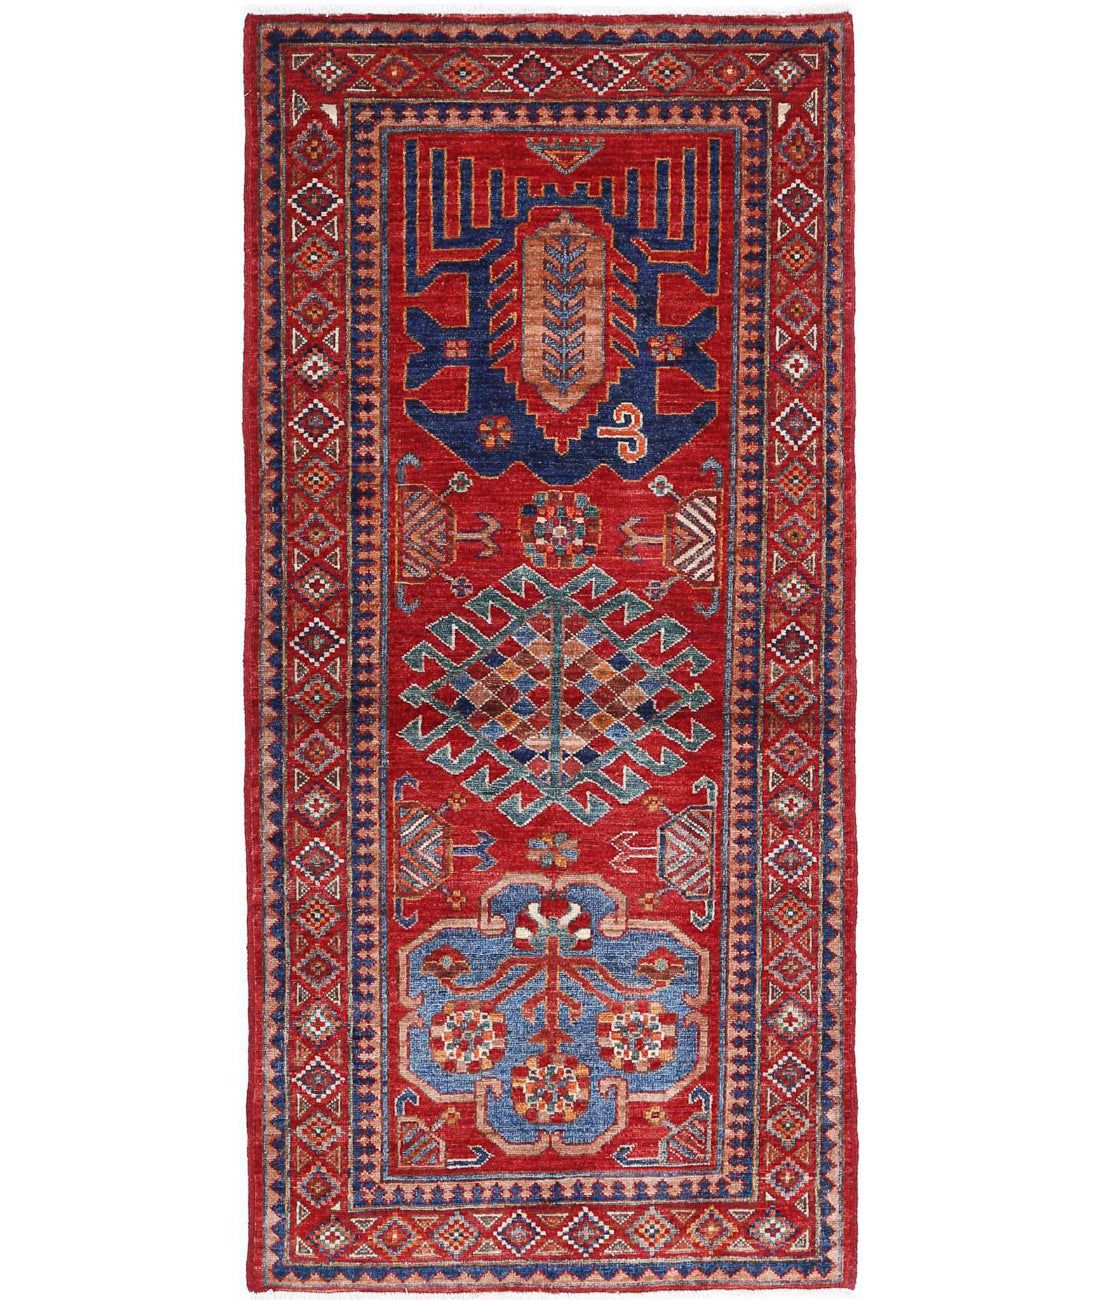 Hand Knotted Nomadic Caucasian Humna Wool Rug - 2'9'' x 5'10'' 2'9'' x 5'10'' (83 X 175) / Red / Taupe